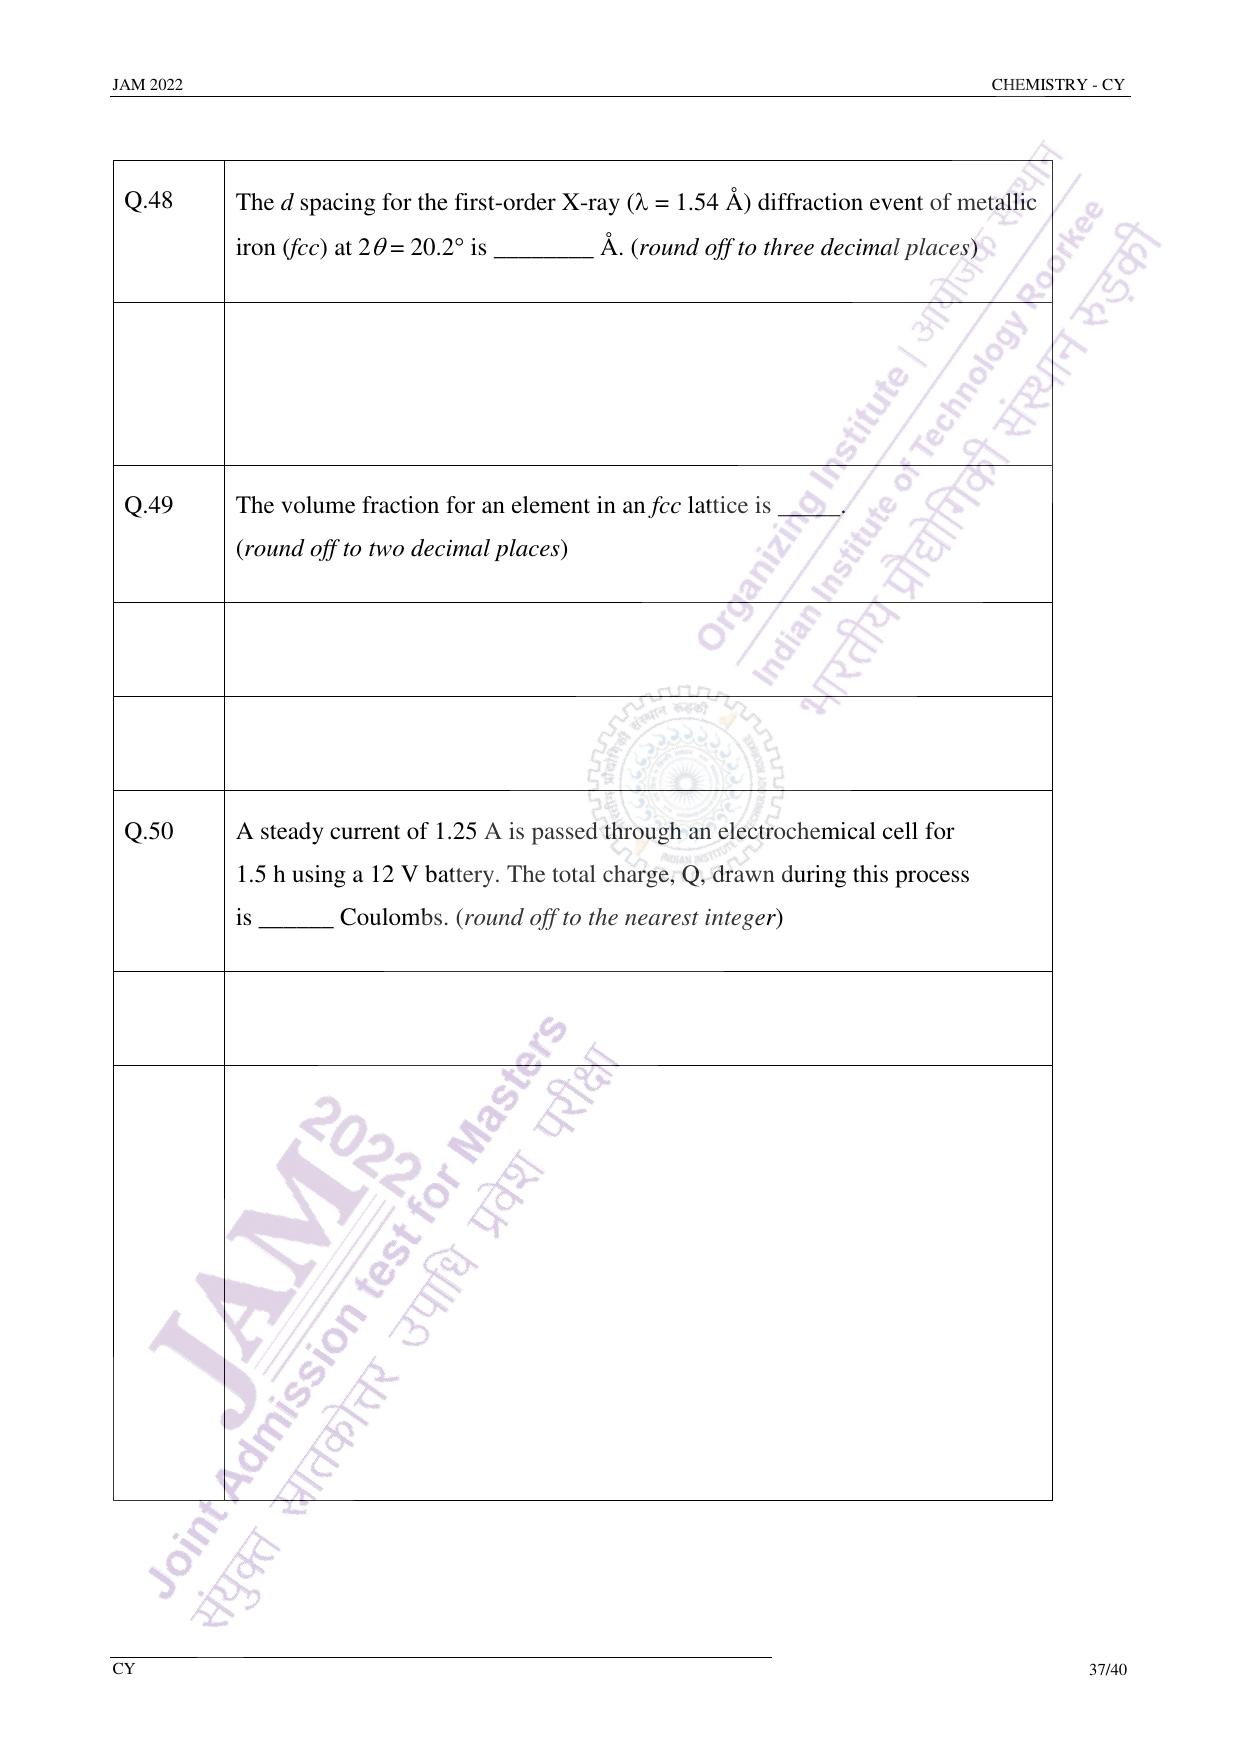 JAM 2022: CY Question Paper - Page 36